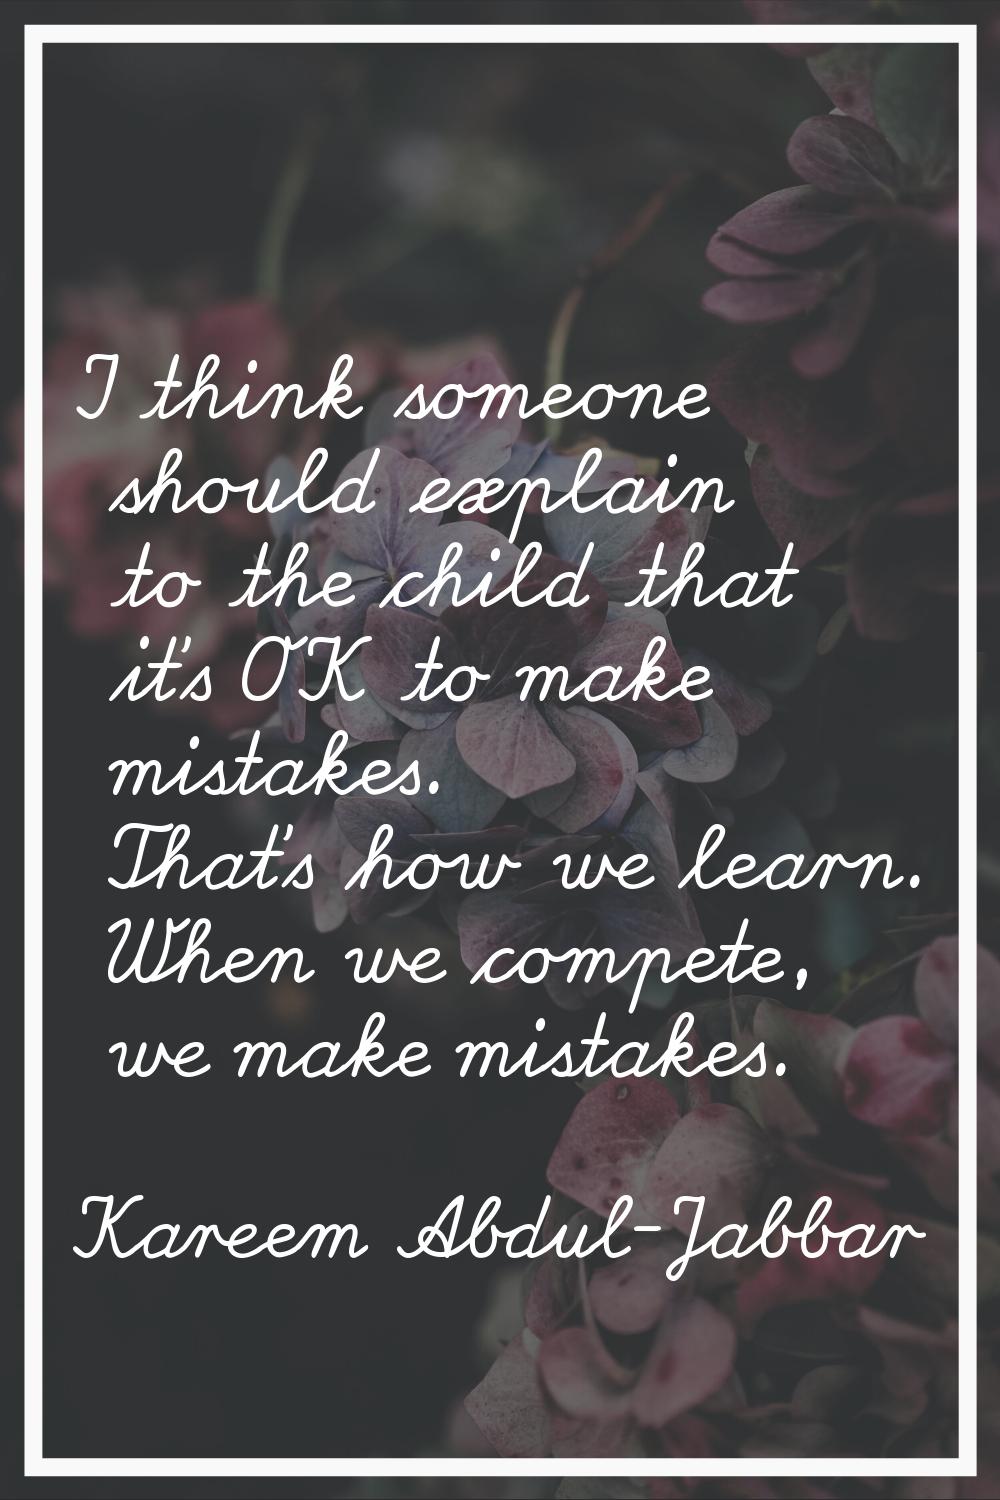 I think someone should explain to the child that it's OK to make mistakes. That's how we learn. Whe